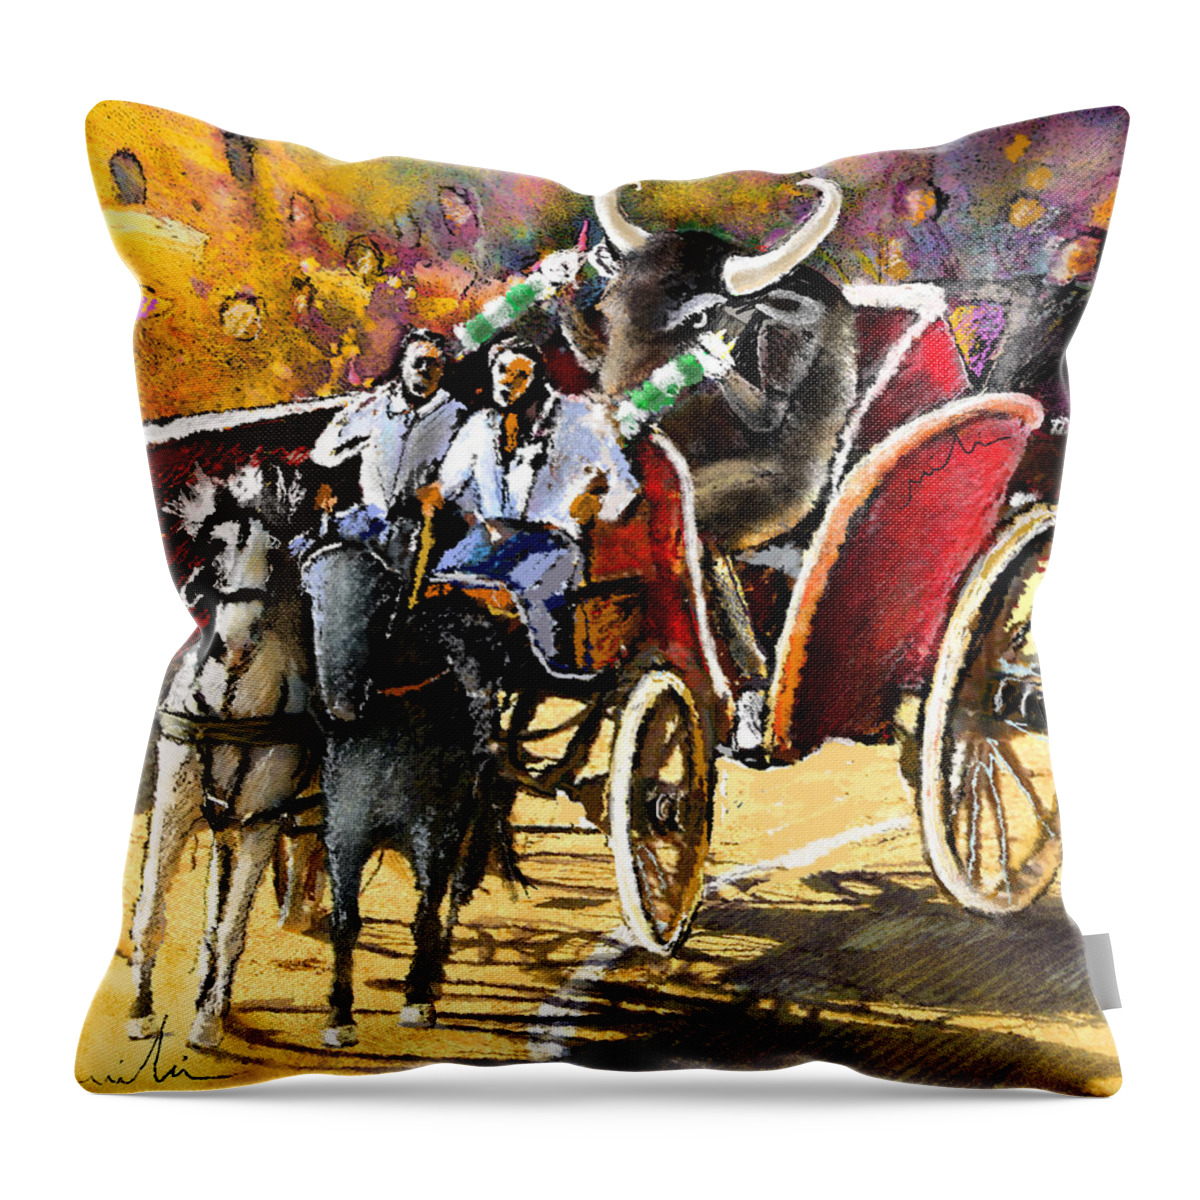 Bulls Throw Pillow featuring the painting Proba Bull Cause by Miki De Goodaboom